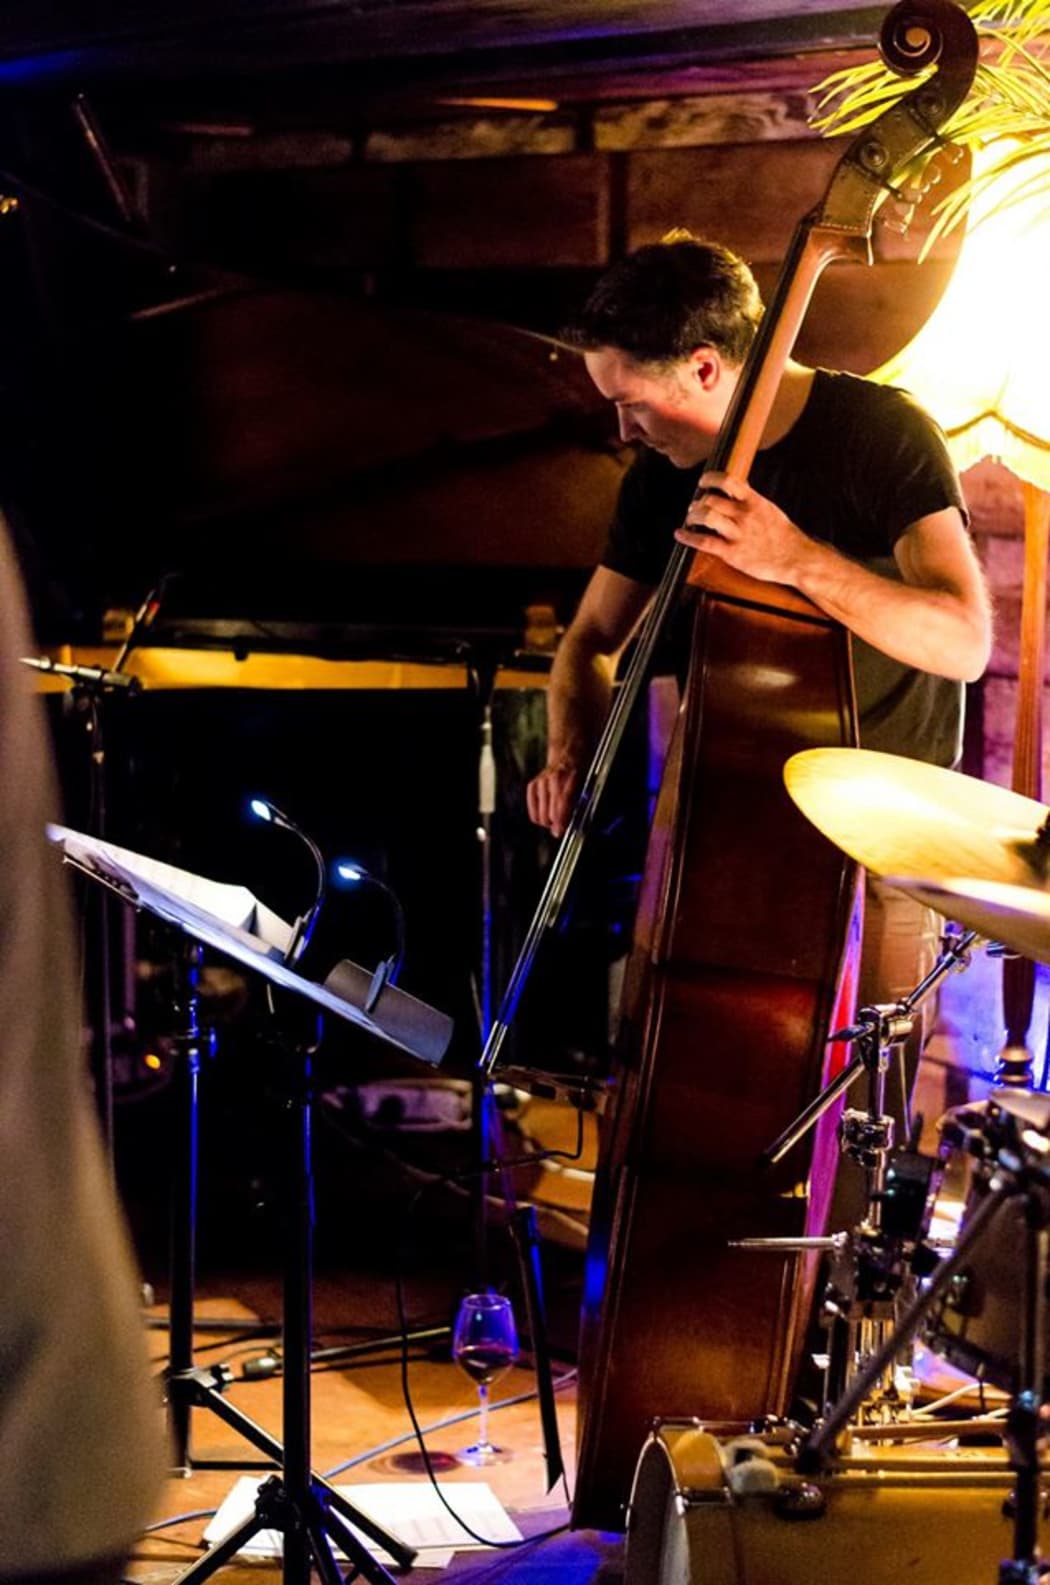 Nick Tipping in his element - behind the bass at a jazz gig.